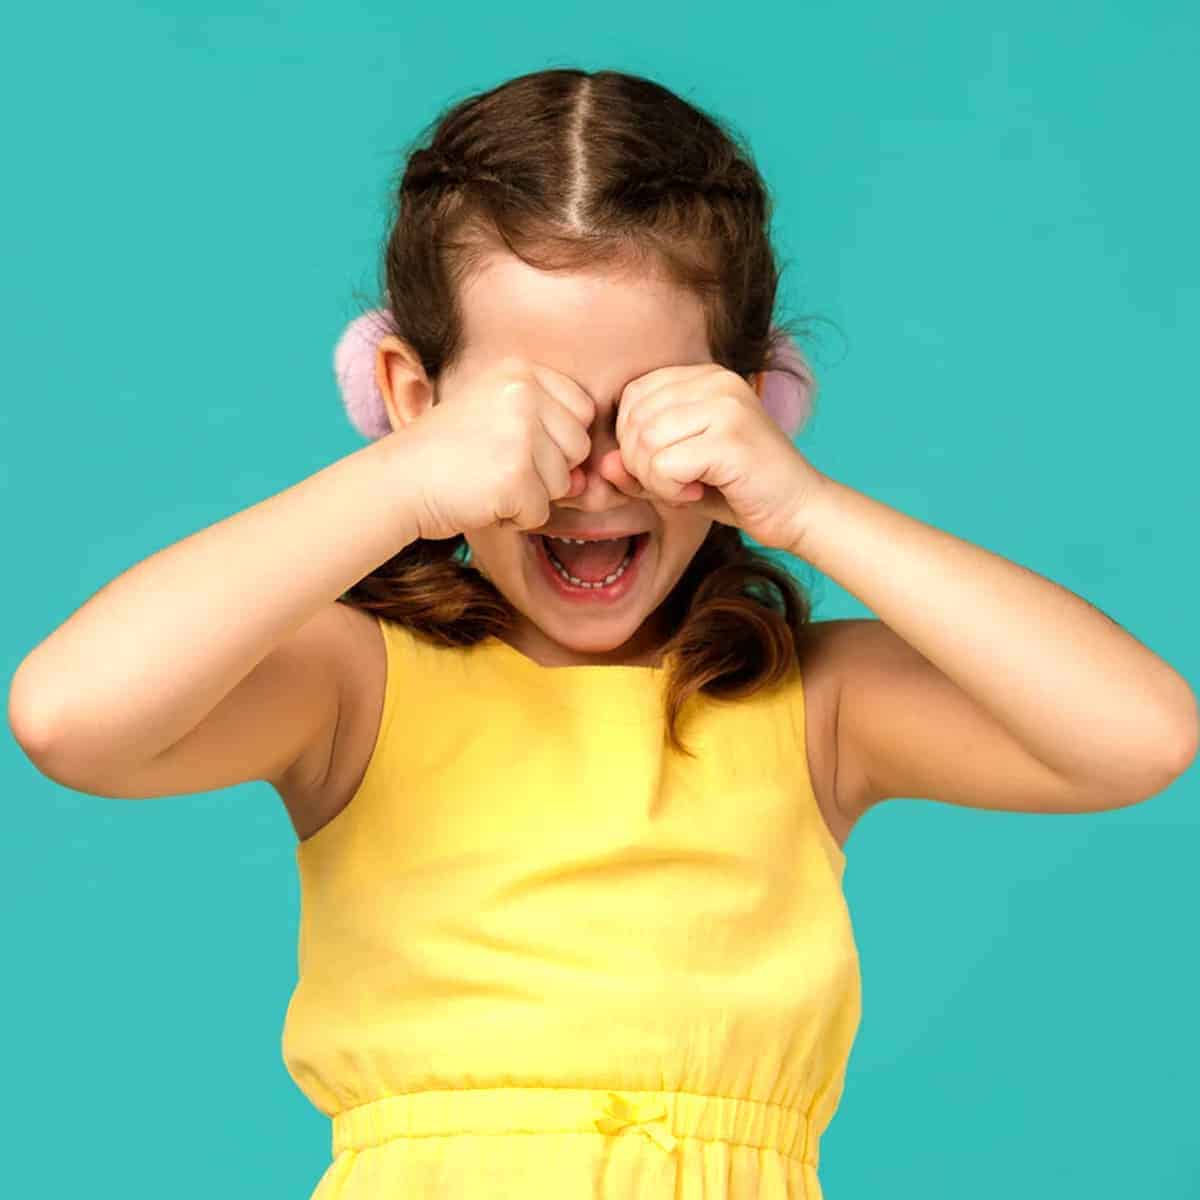 Does Your Child Cry All the Time? This Might Be Why…